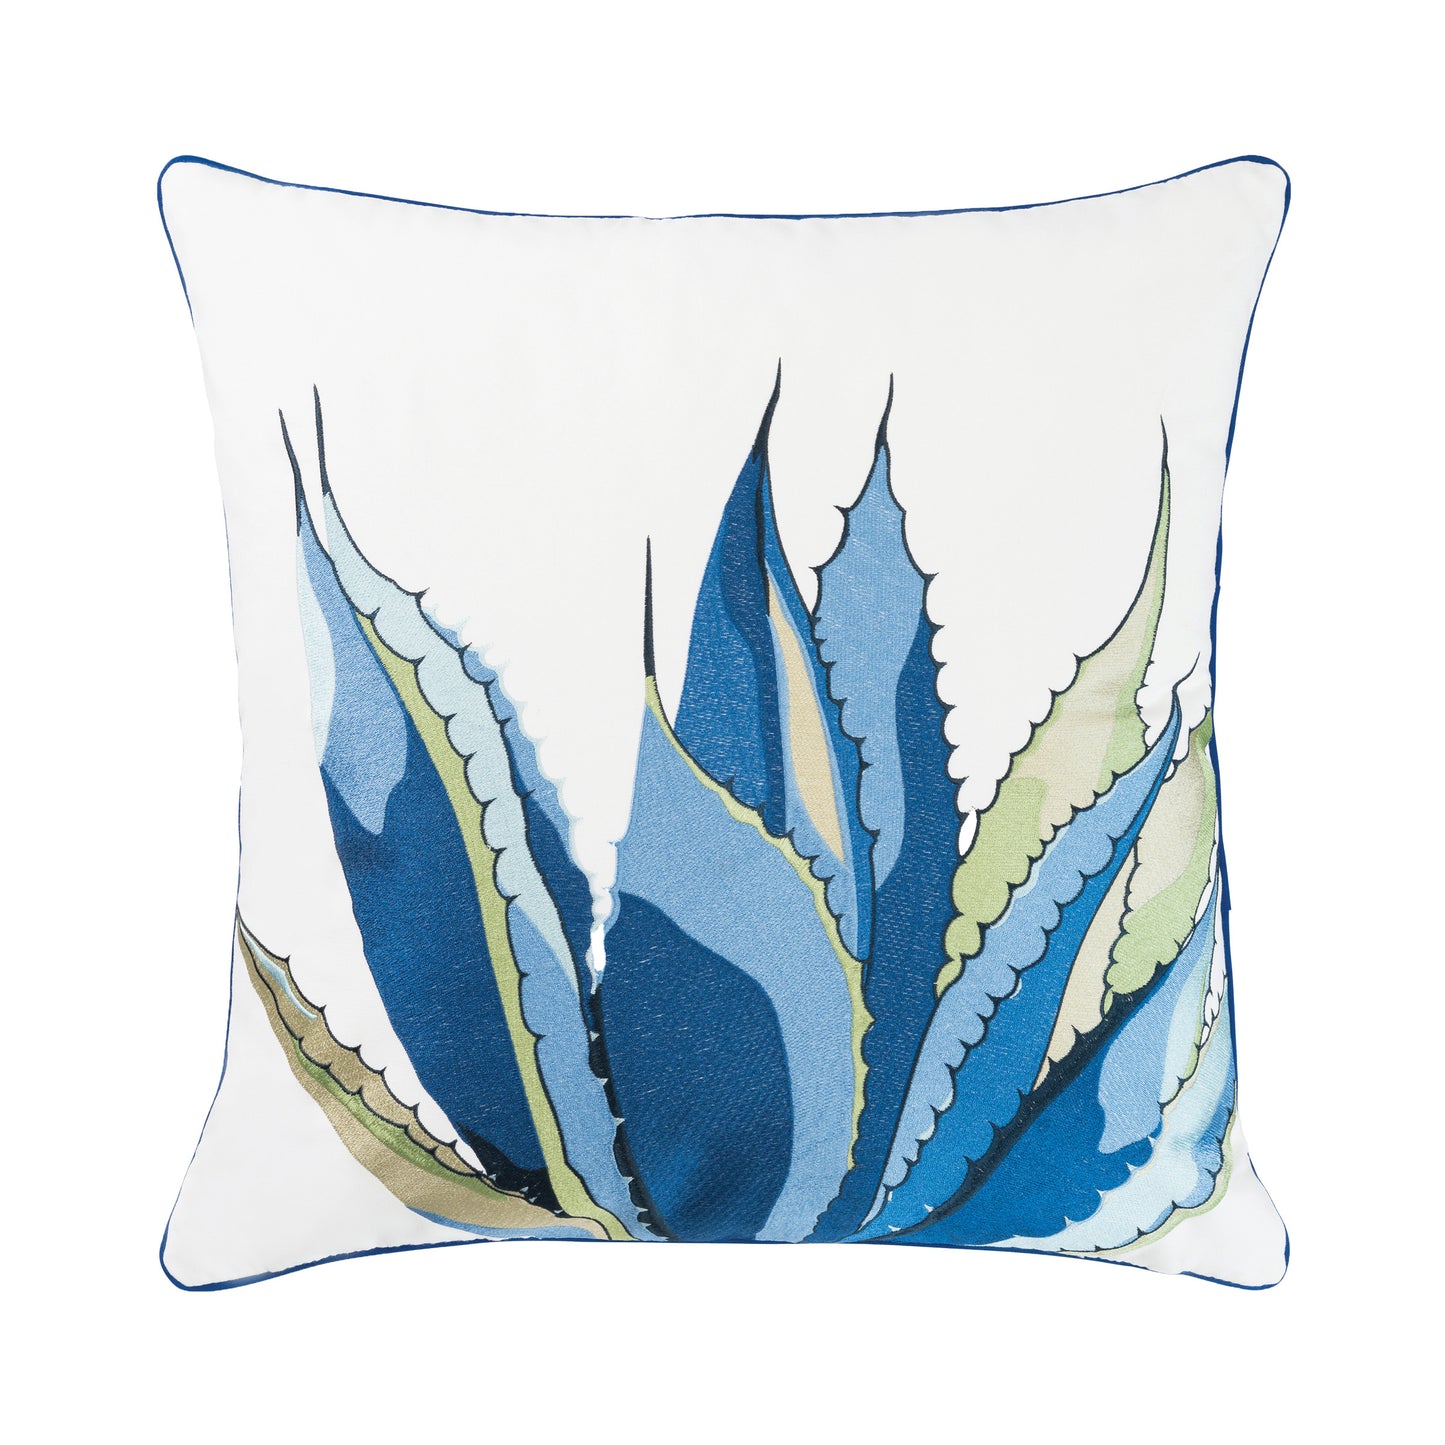 Blue and green agave leaves embroidered on a white background. Pillow is finished with blue piped edging.